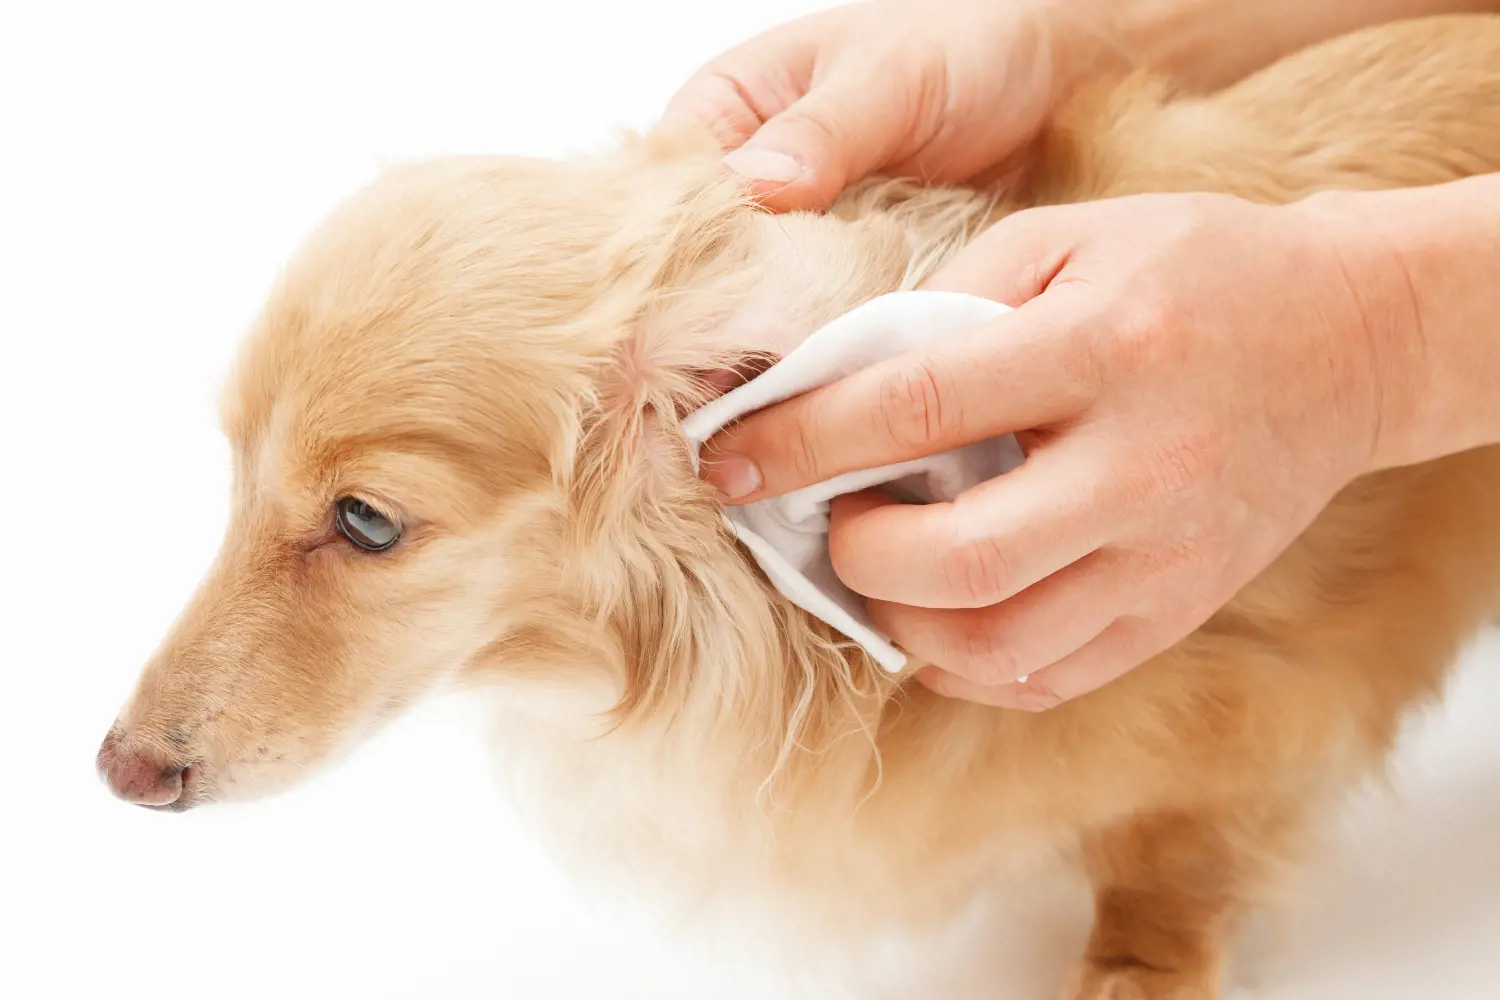 A guide on how to bandage a dog's ear tip